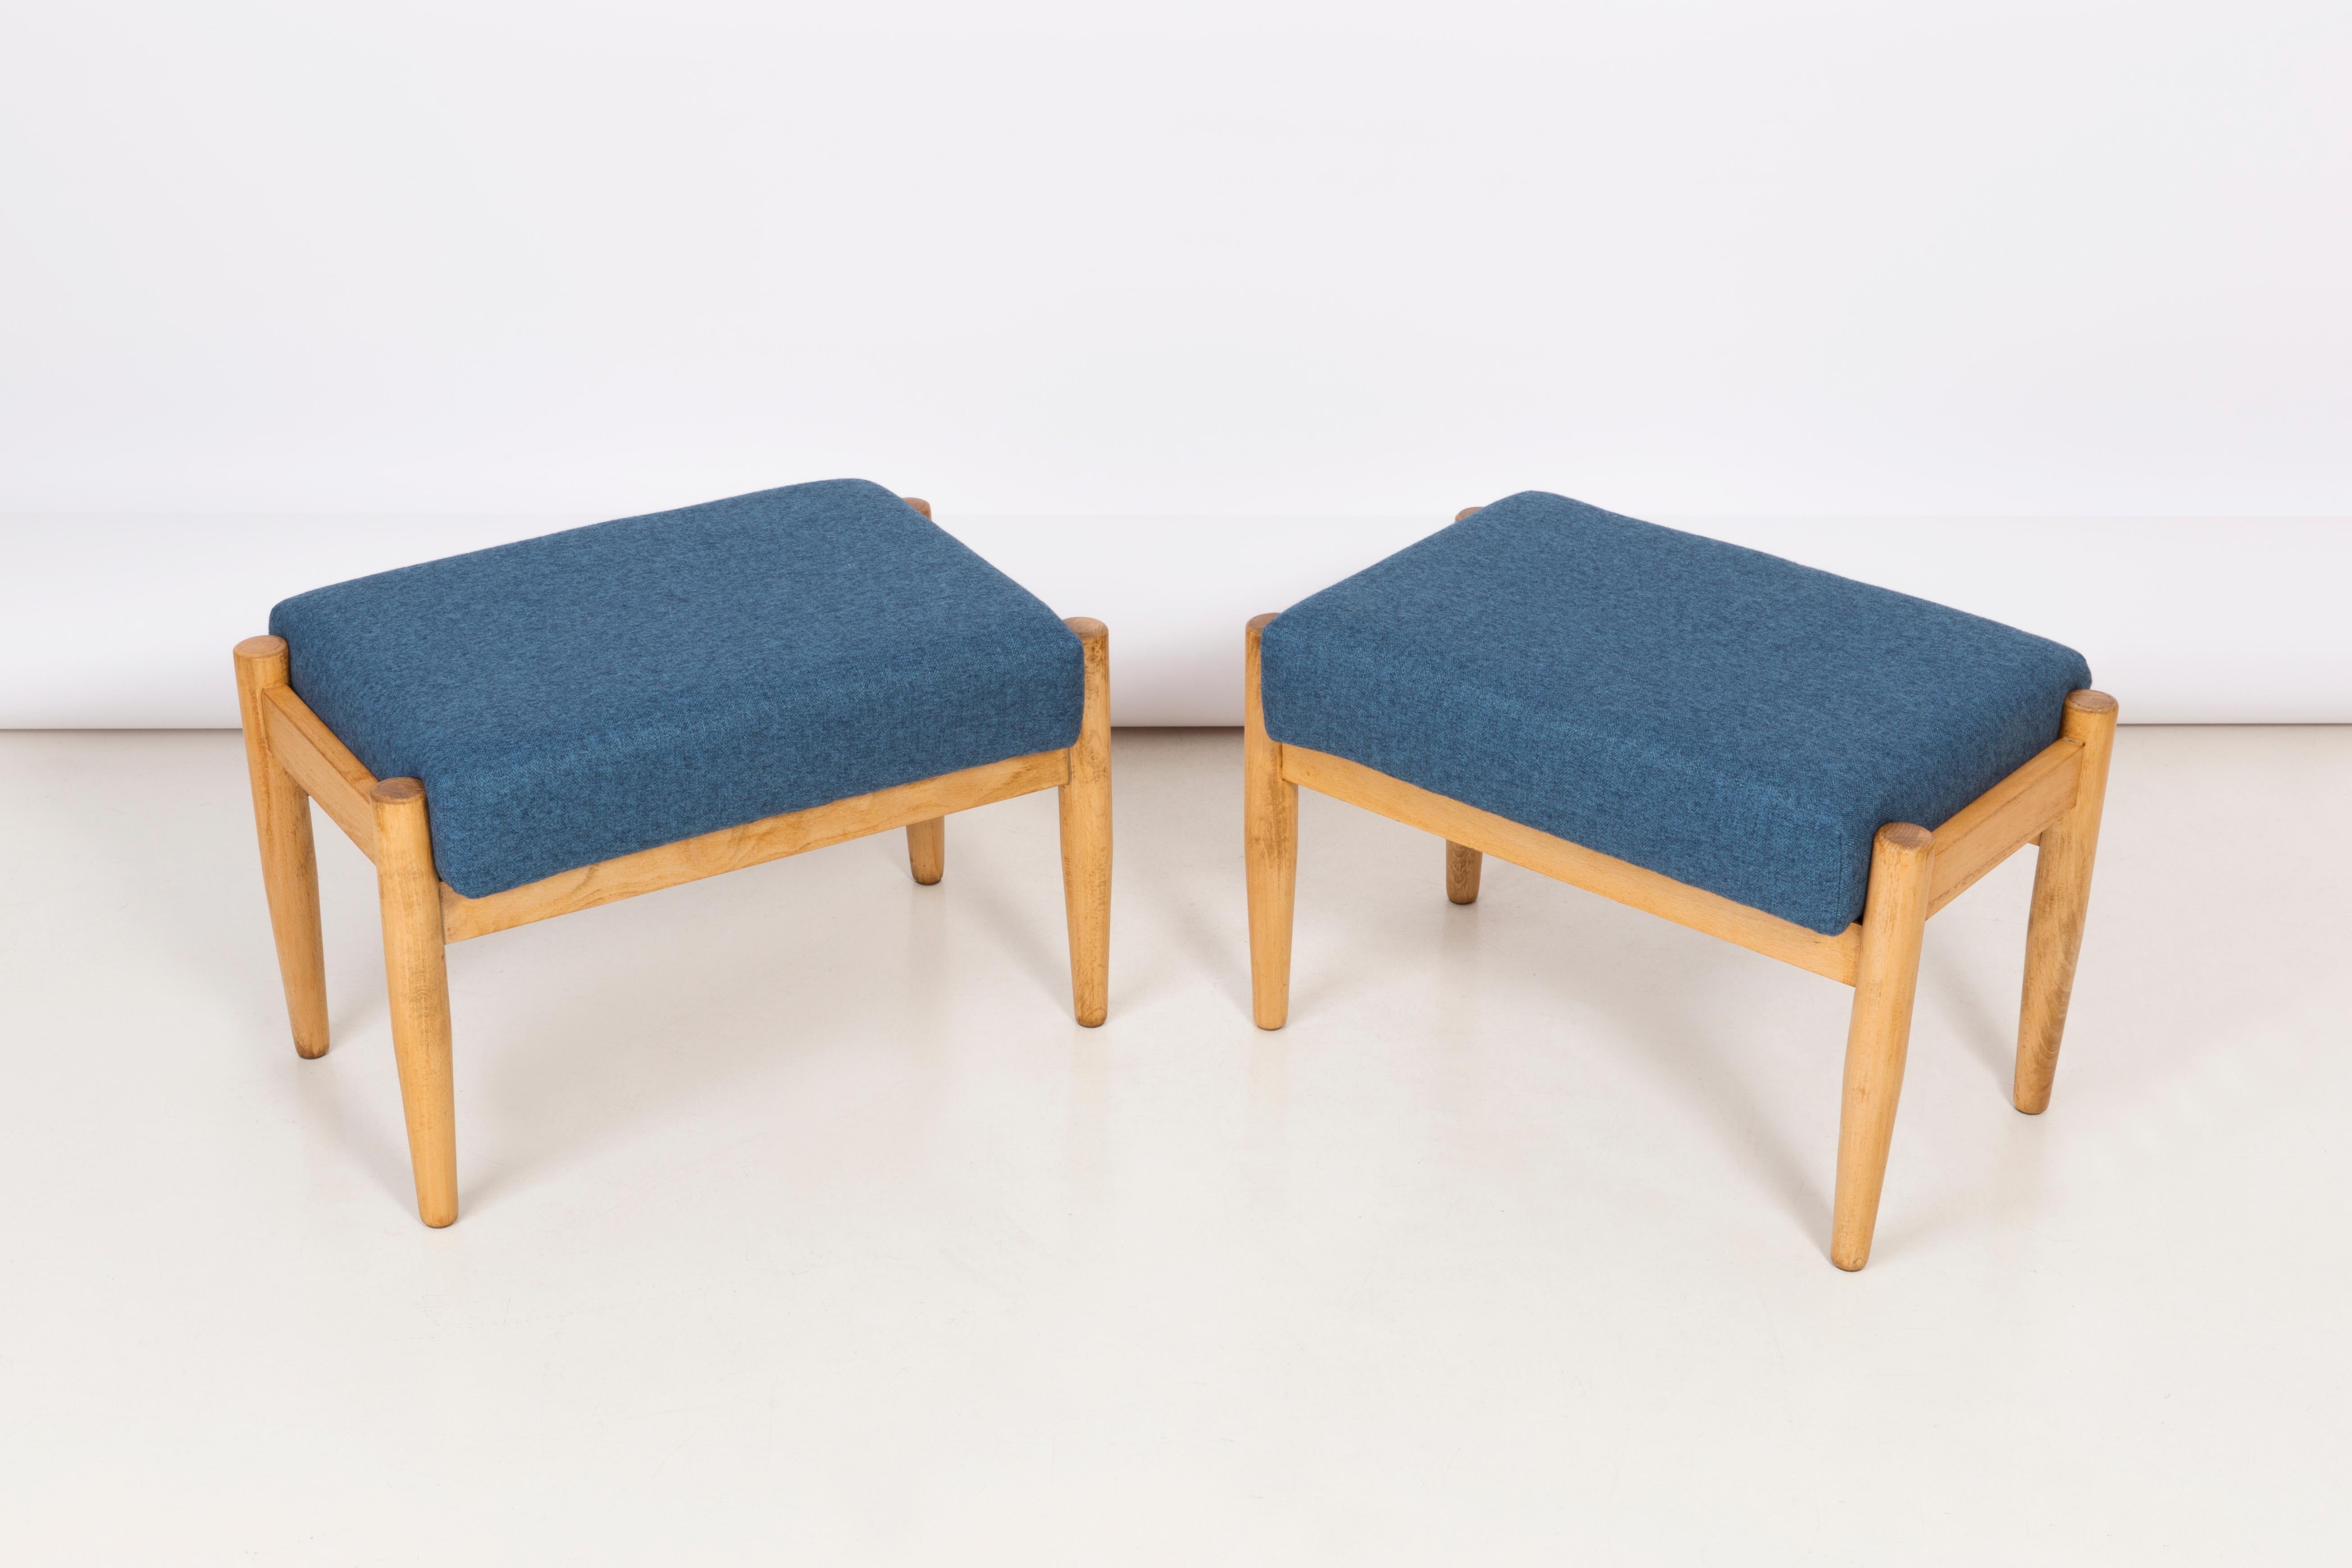 Stools from the turn of the 1960s. Beautiful blue high quality upholstery. The stools consists of an upholstered part, a seat and wooden legs narrowing downwards, characteristic of the 1960s style. We can prepare this stools also in another option